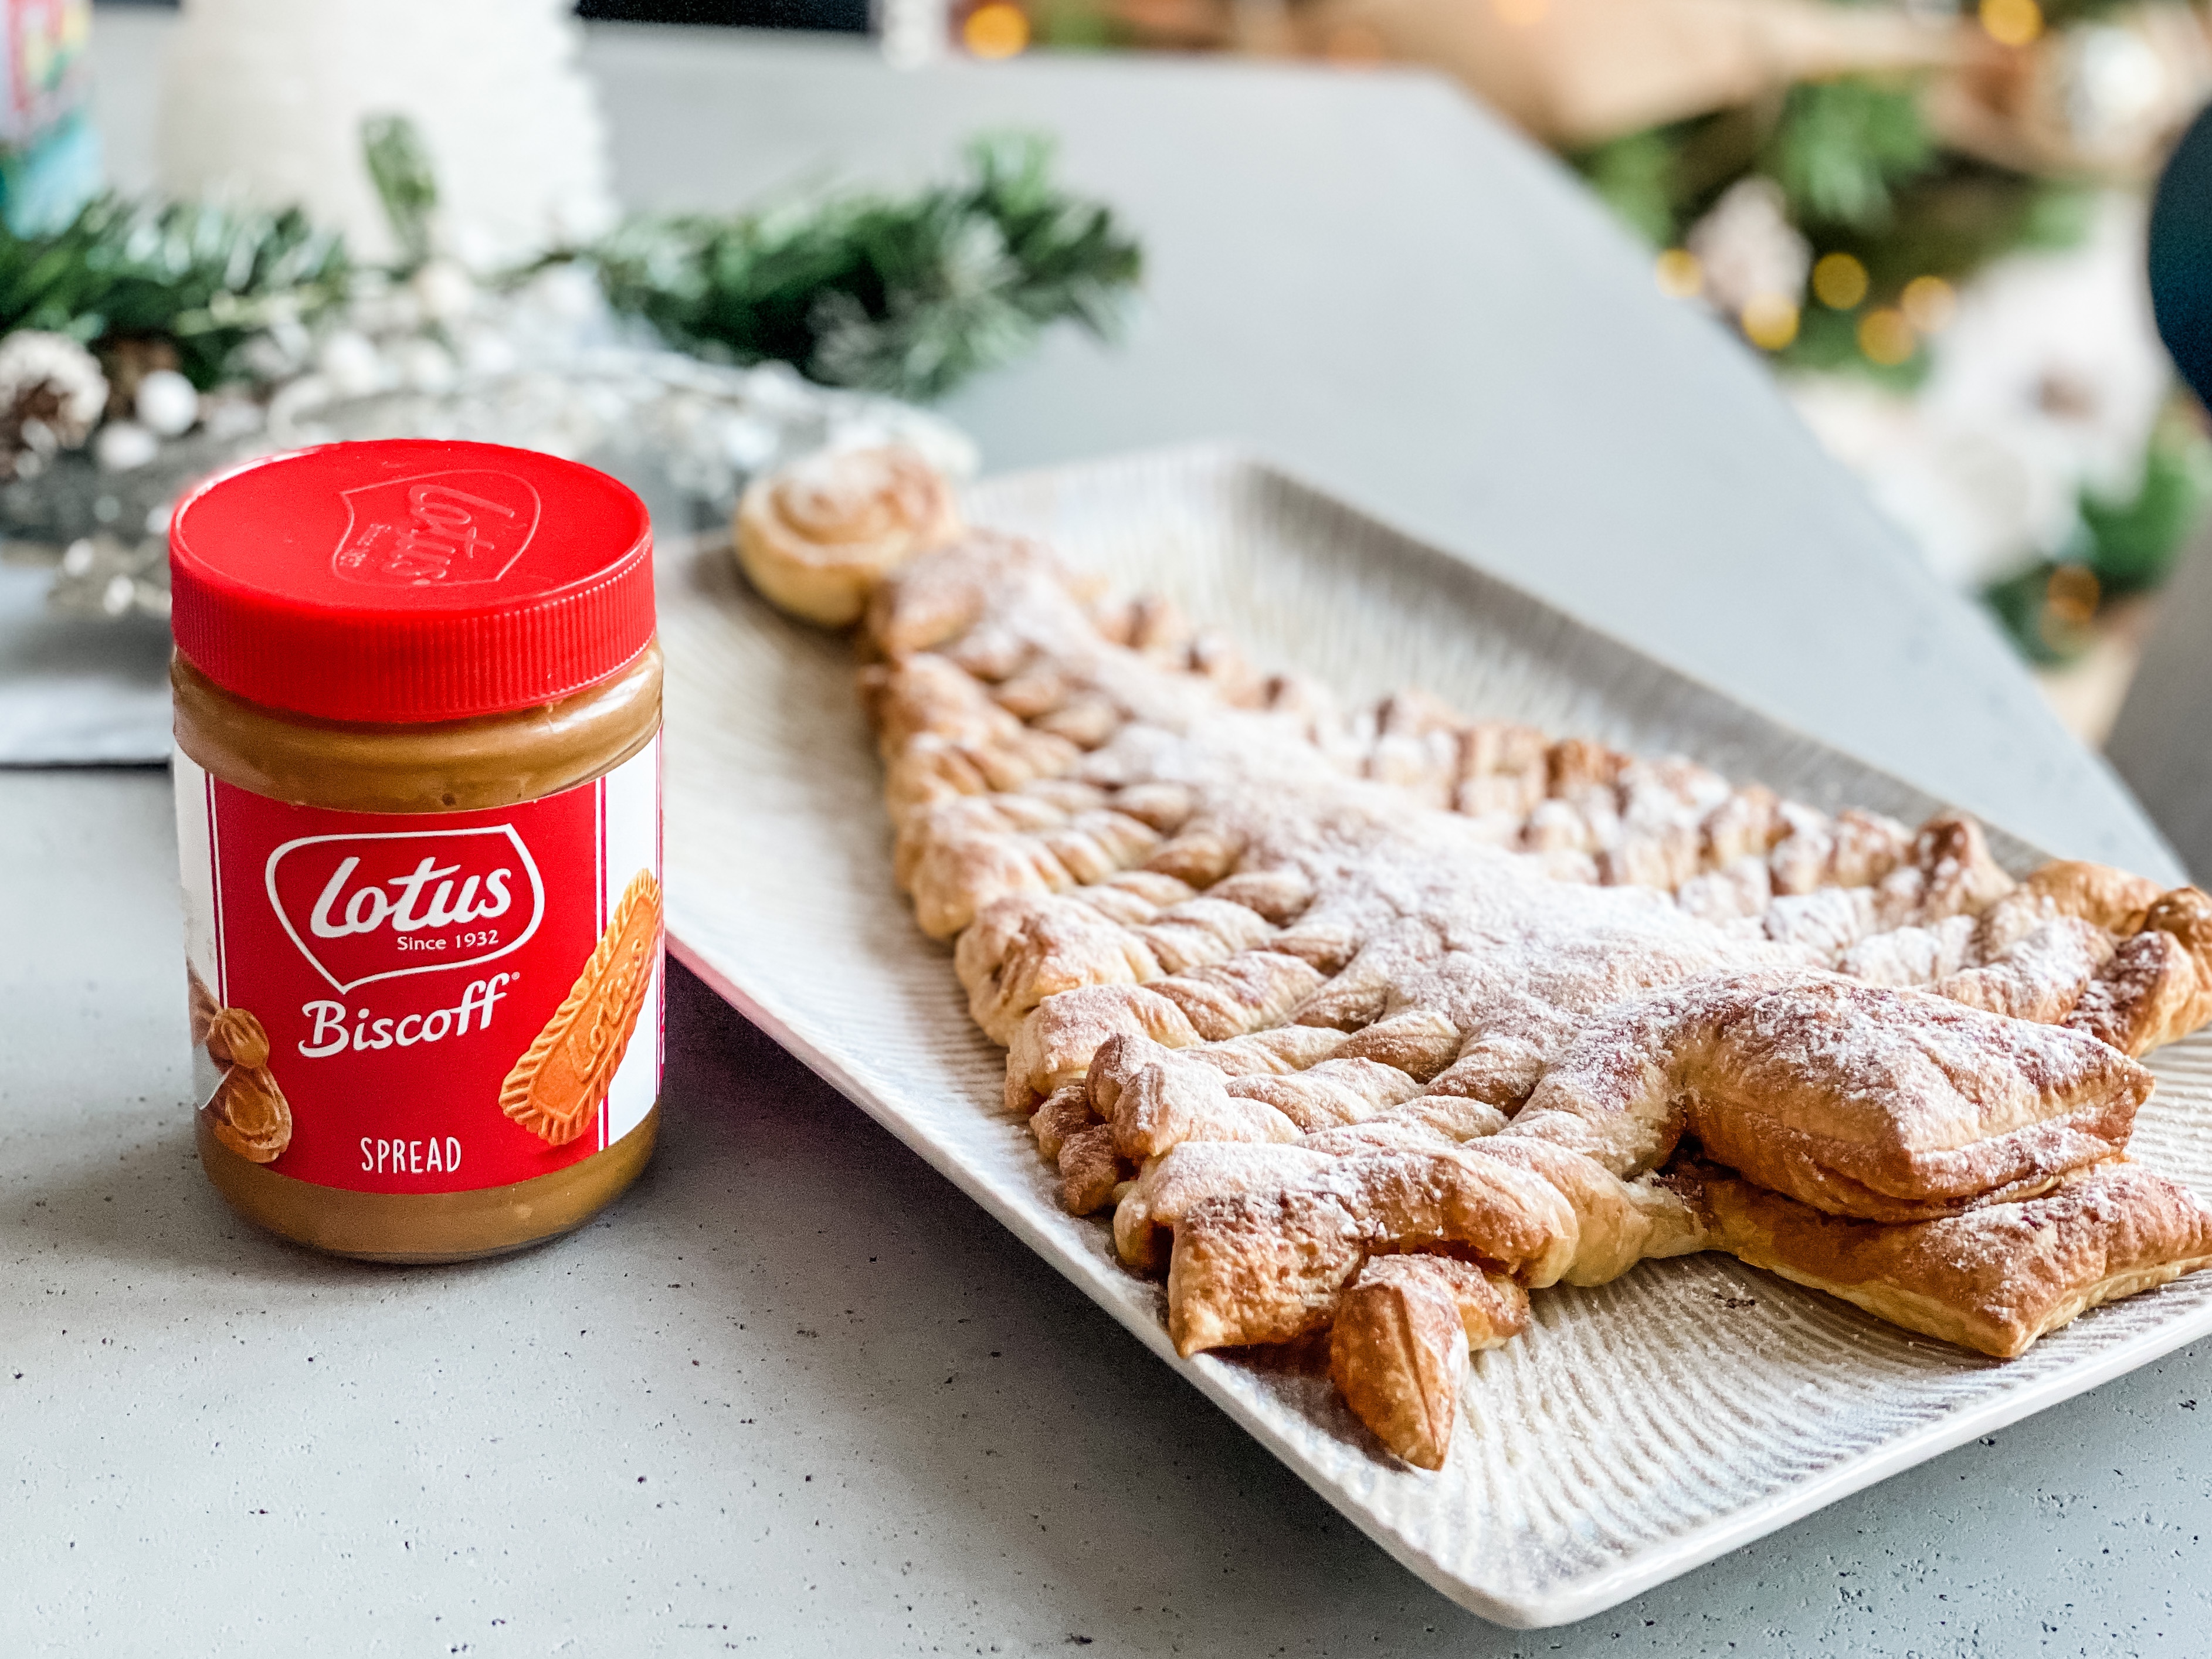 A puff pastry Christmas tree sprinkled with icing sugar. A tub of Lotus Biscoff sits next to it